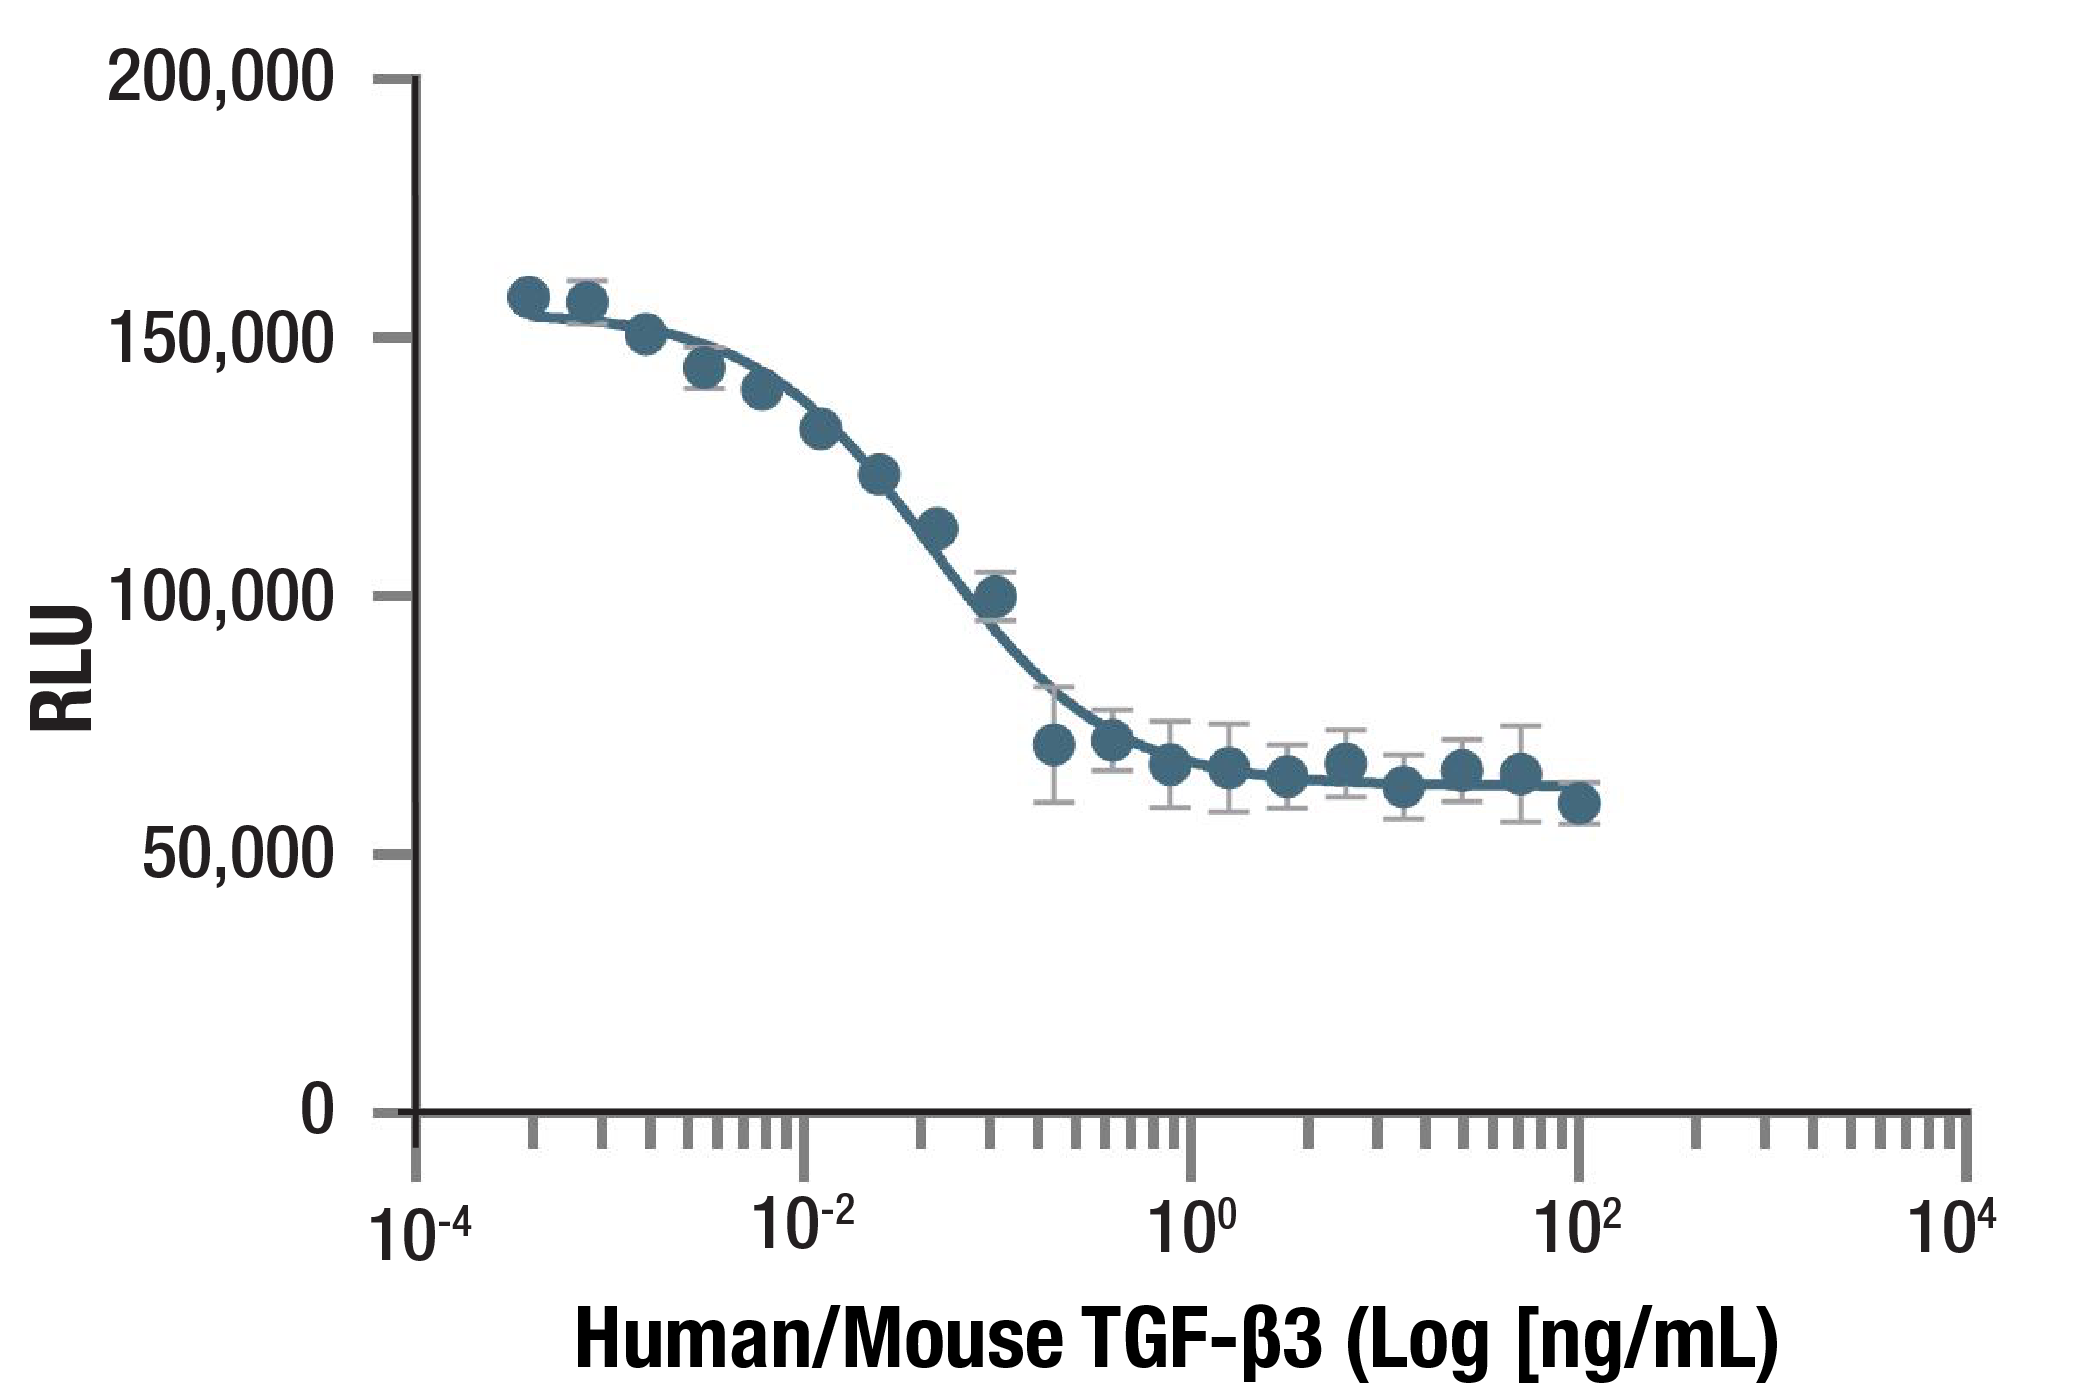  Image 1: Human/Mouse TGF-β3 Recombinant Protein